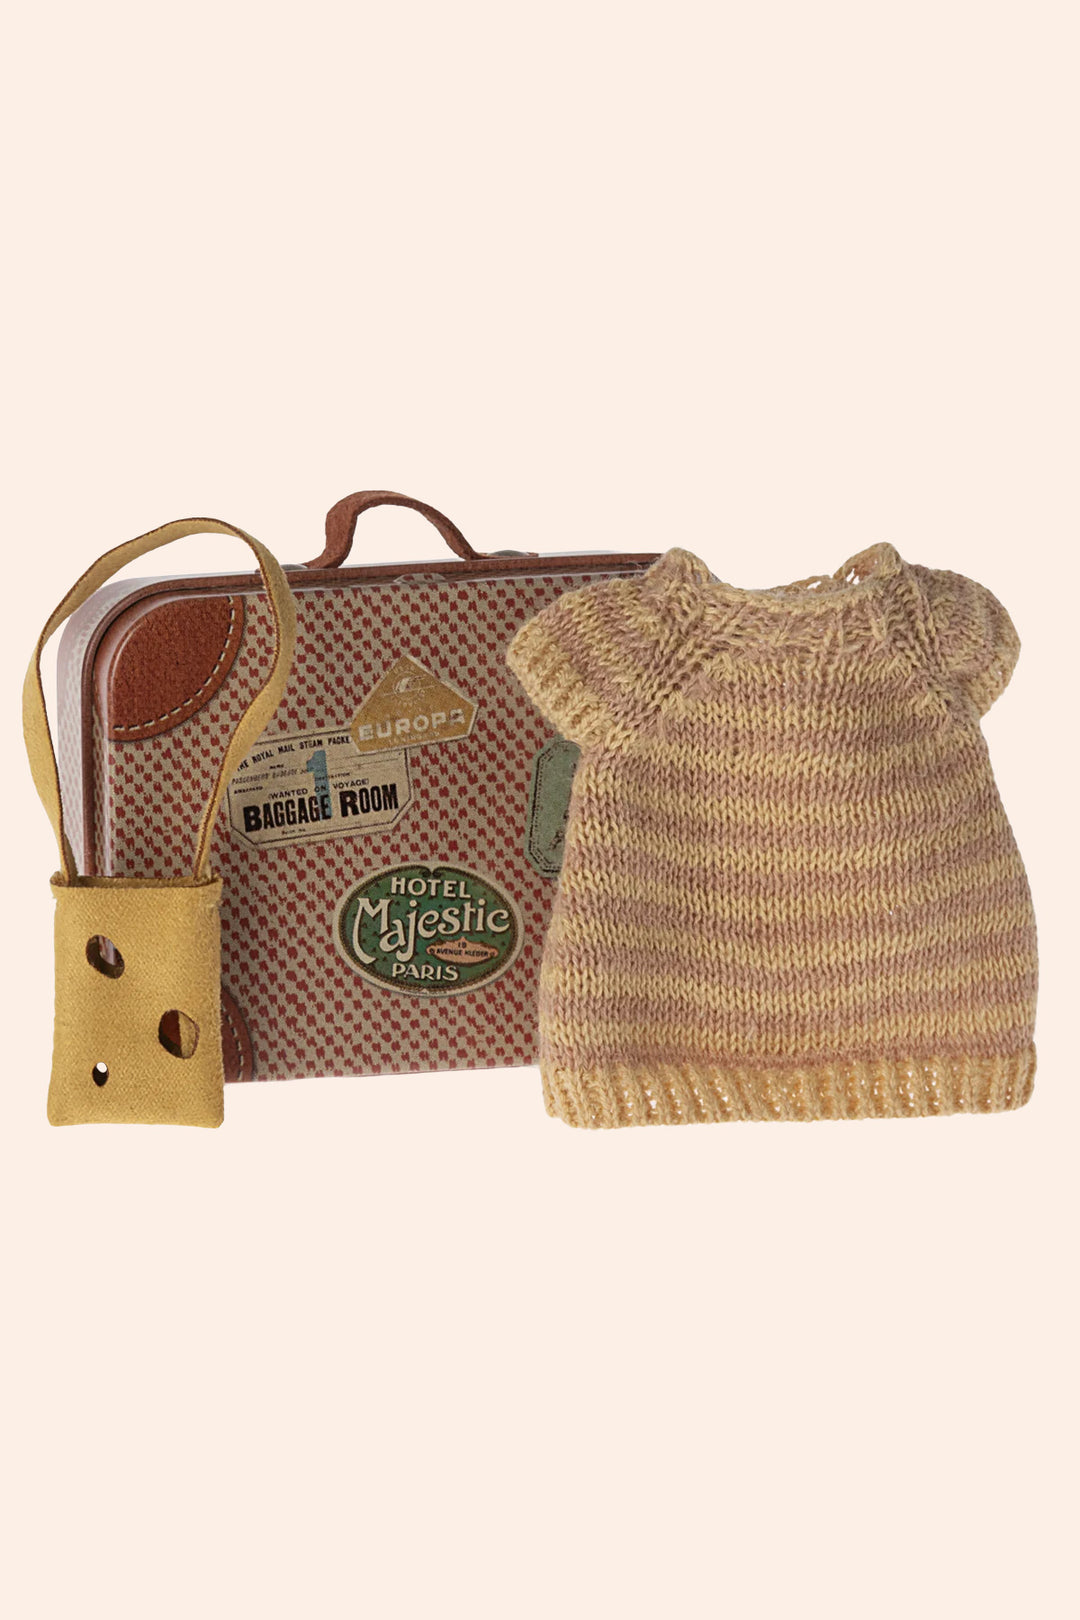 Maileg Knitted Dress and Bag in Suitcase, Big Sister Mouse